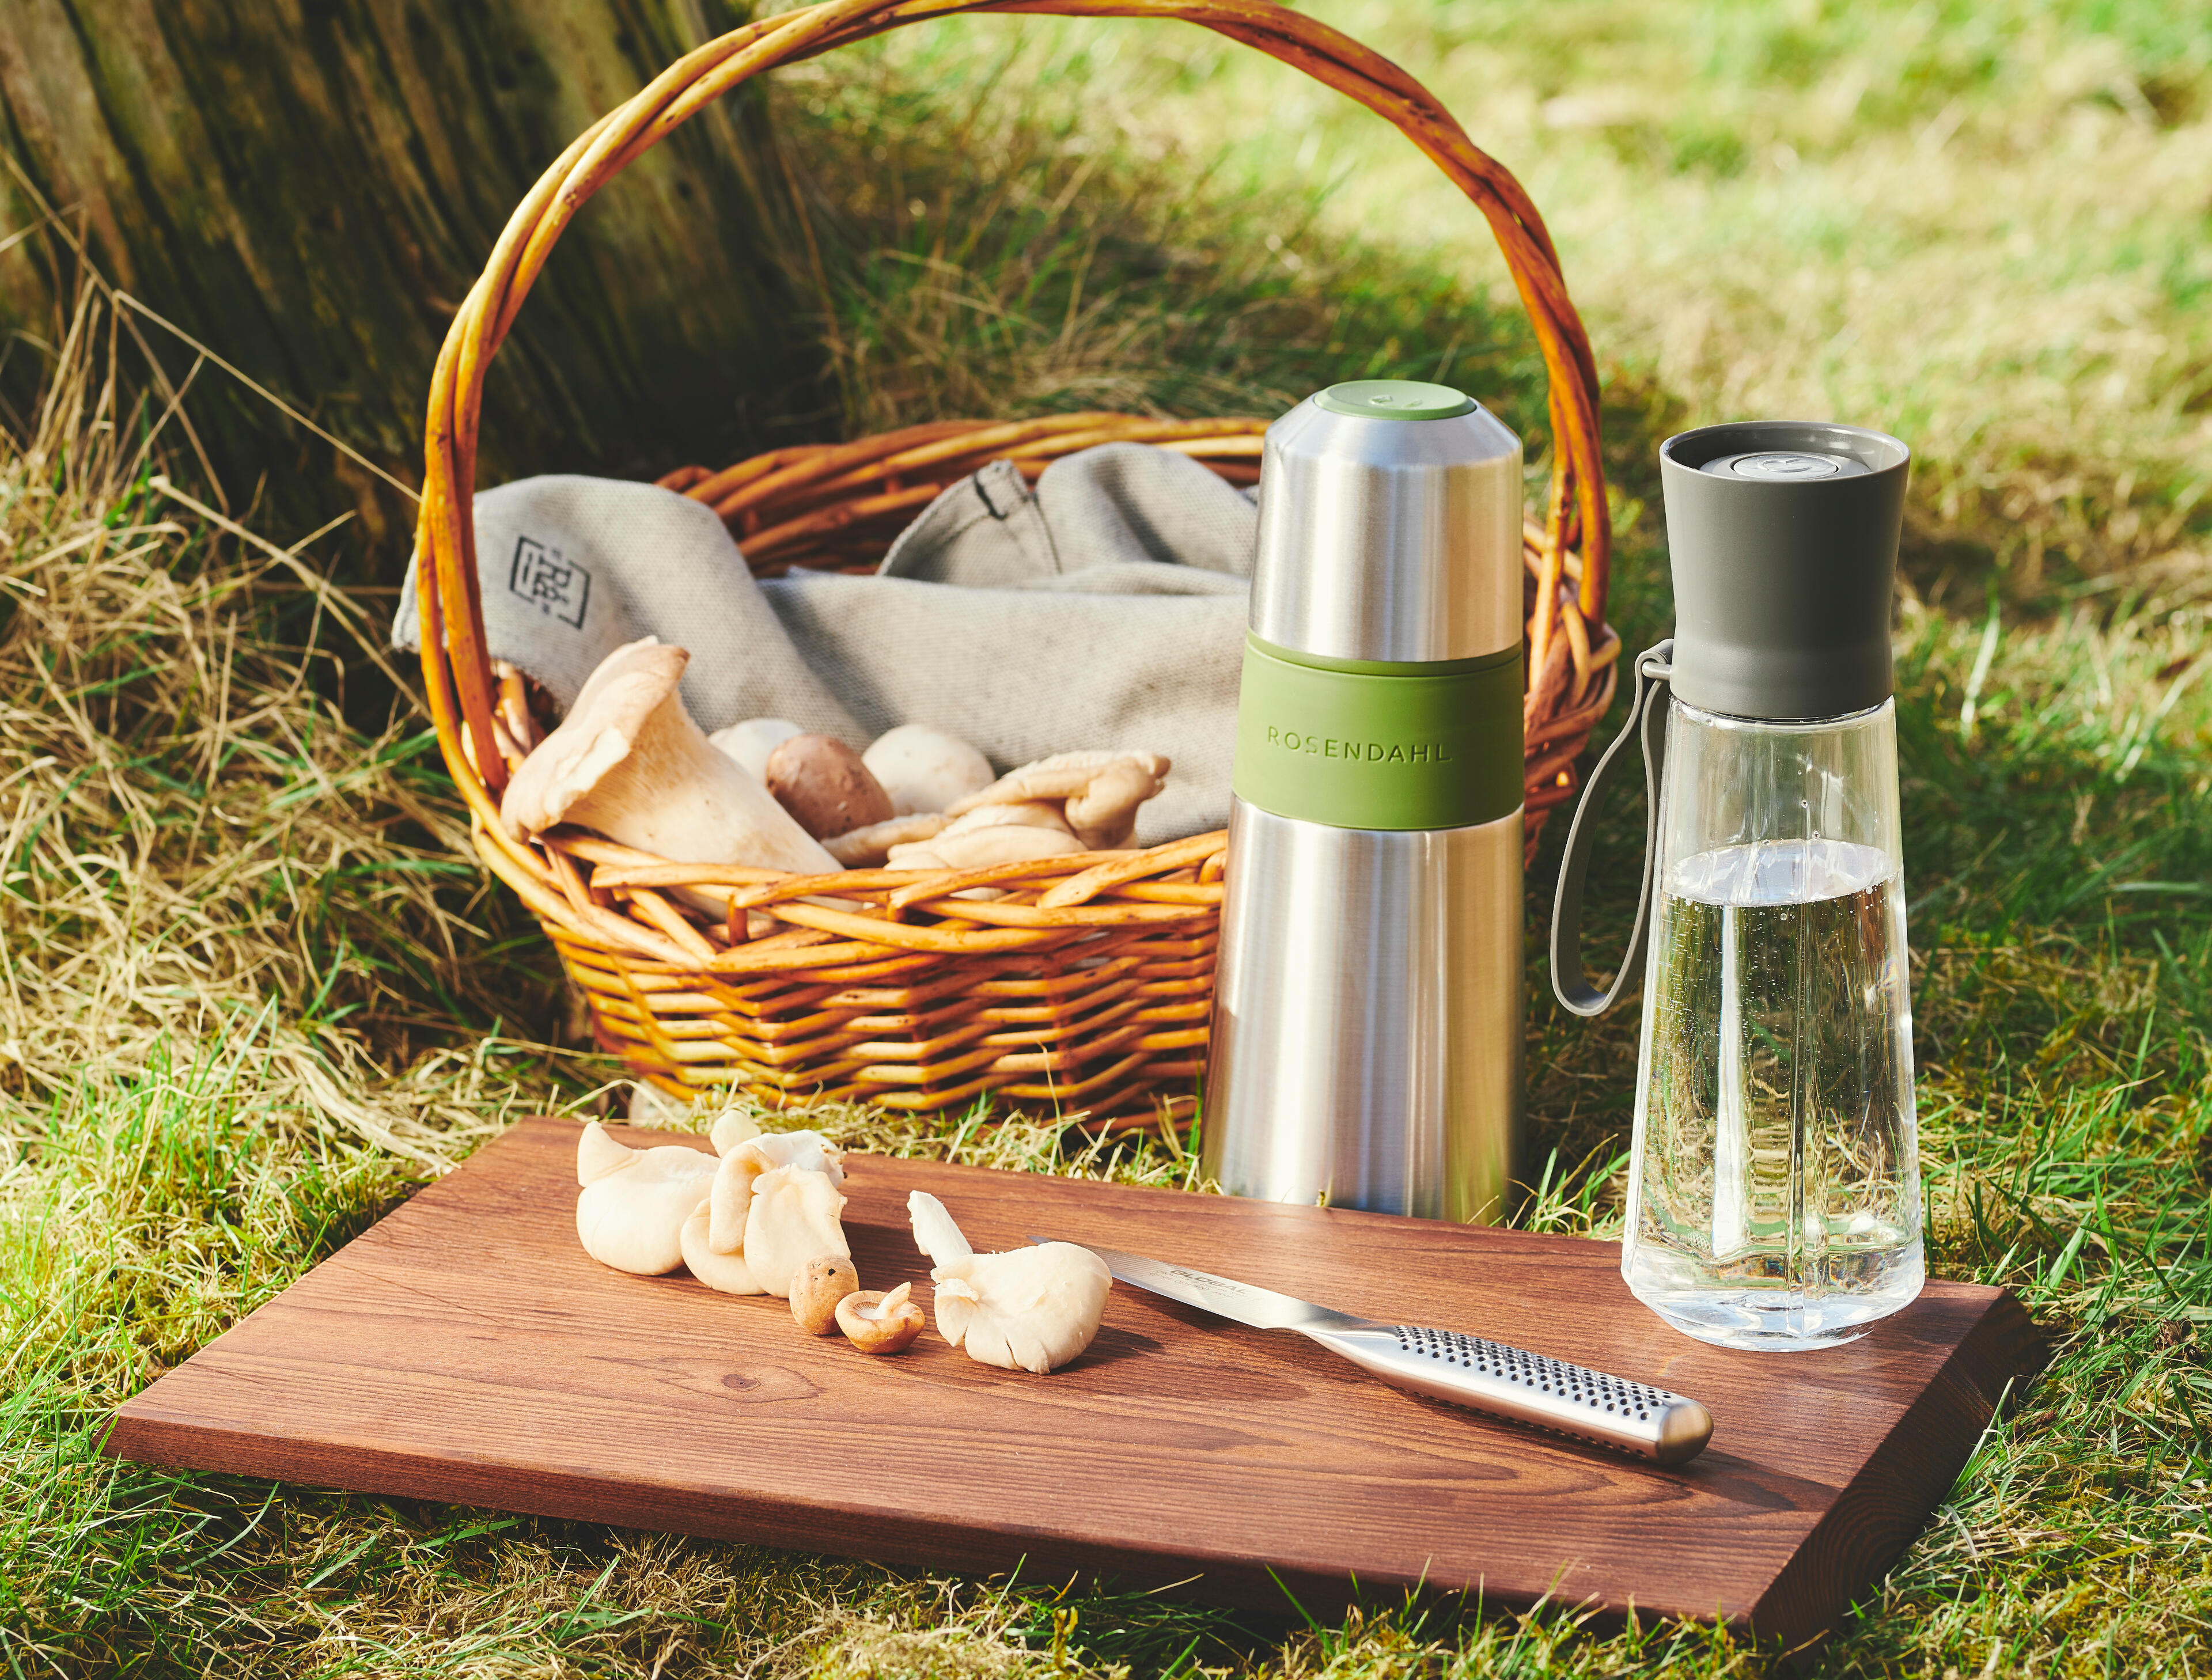 Cutting board, thermo cup and bottle from Rosendahl. Outdoor life